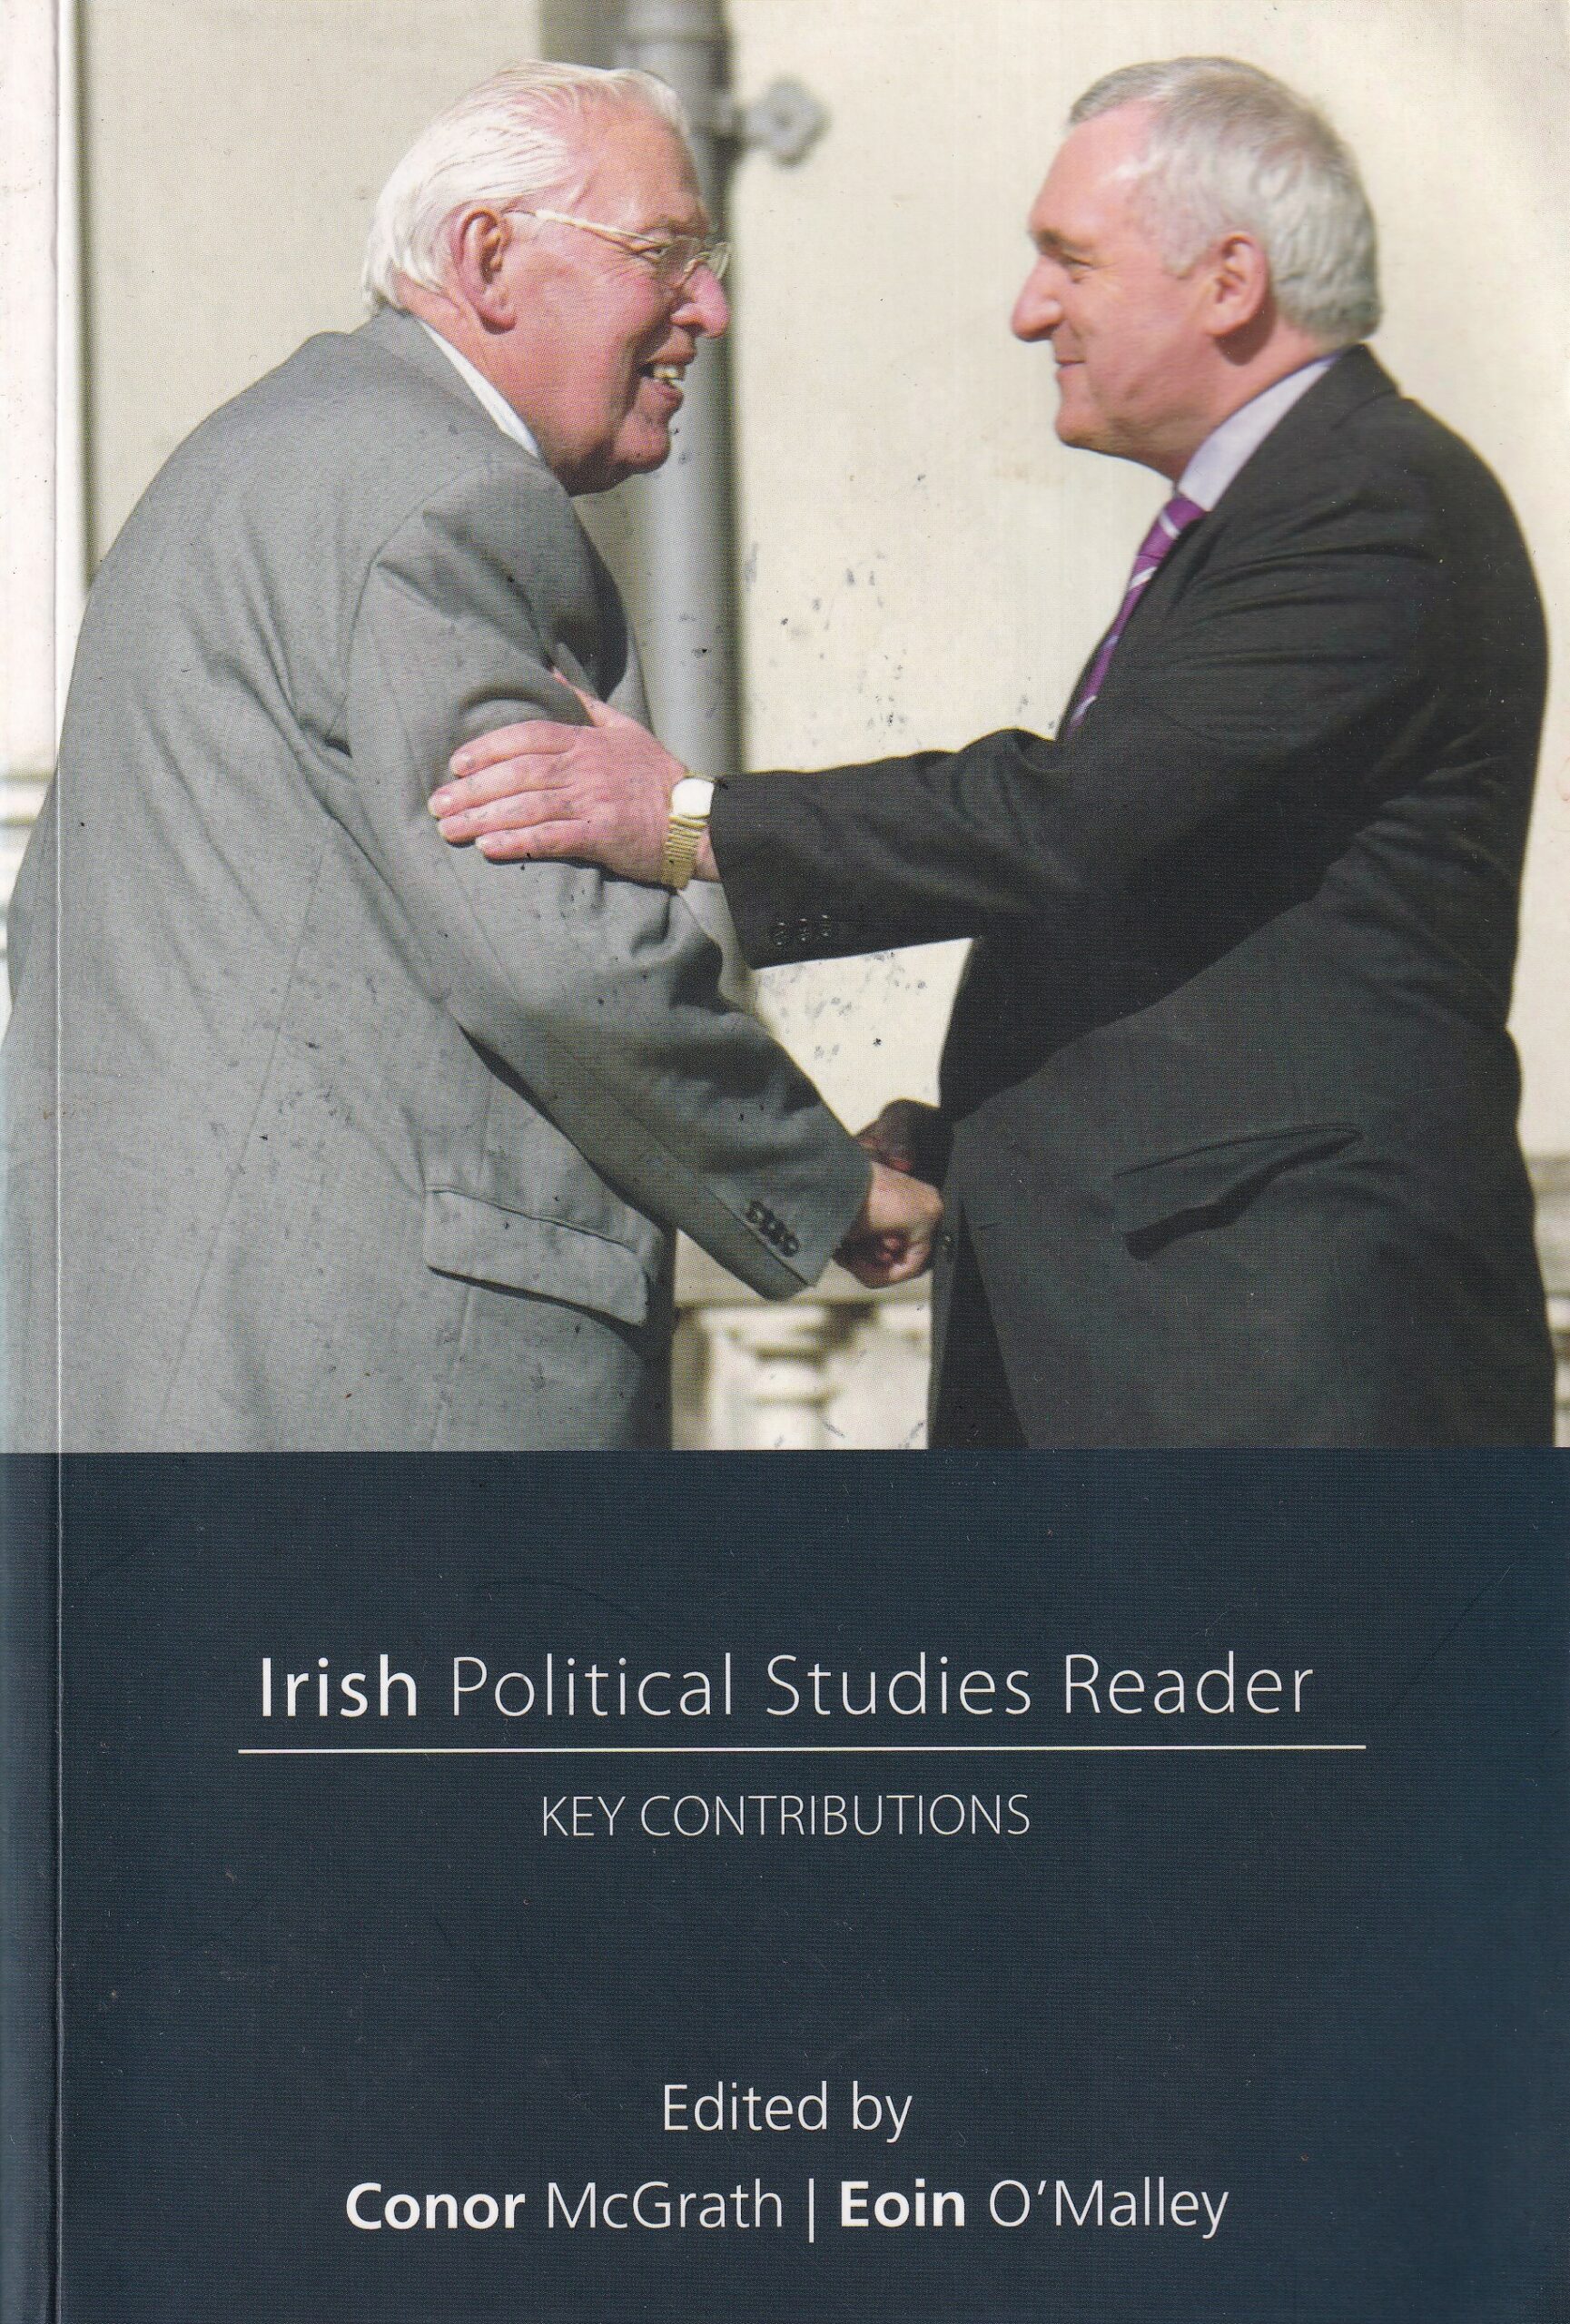 Irish Political Studies Reader: Key Contributions | Conor McGrath and Eoin O'Malley (eds.) | Charlie Byrne's